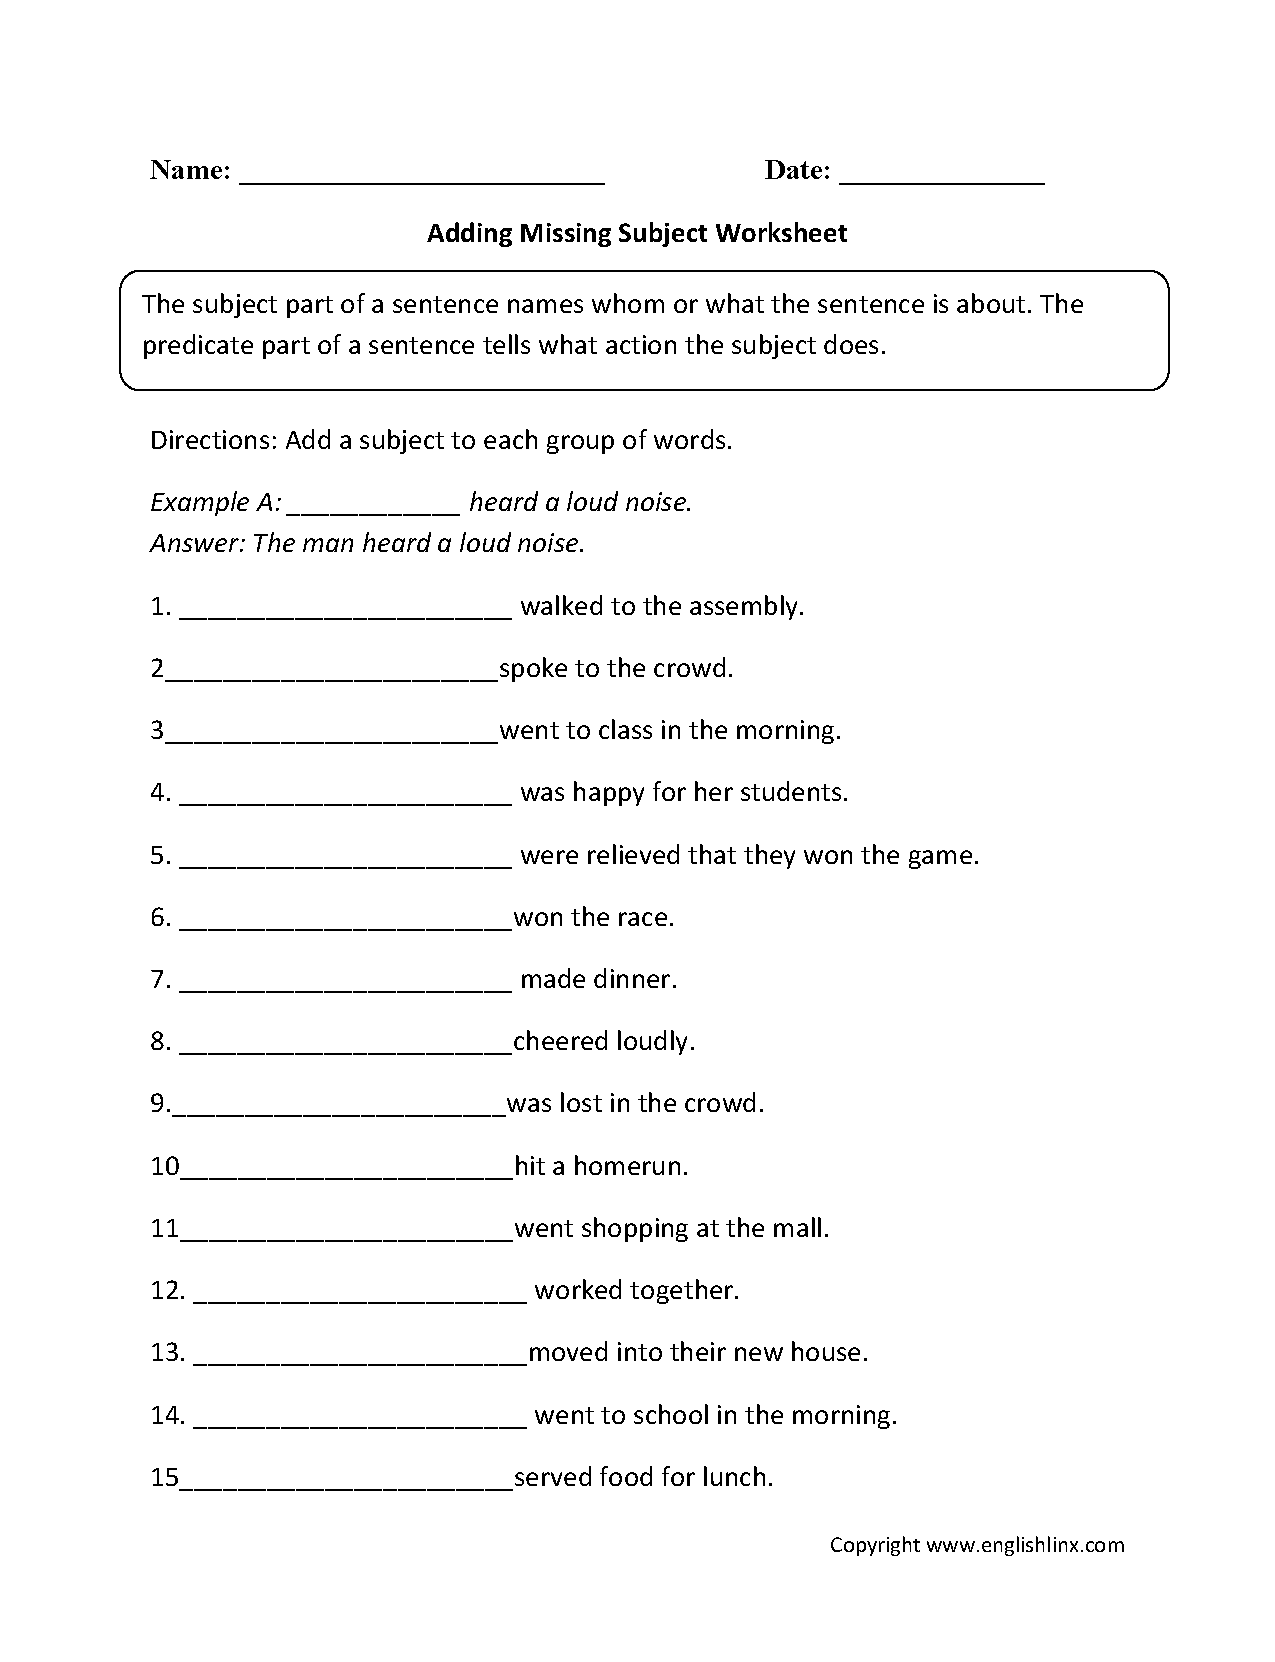 11-best-images-of-diagramming-direct-objects-worksheet-diagramming-sentences-worksheets